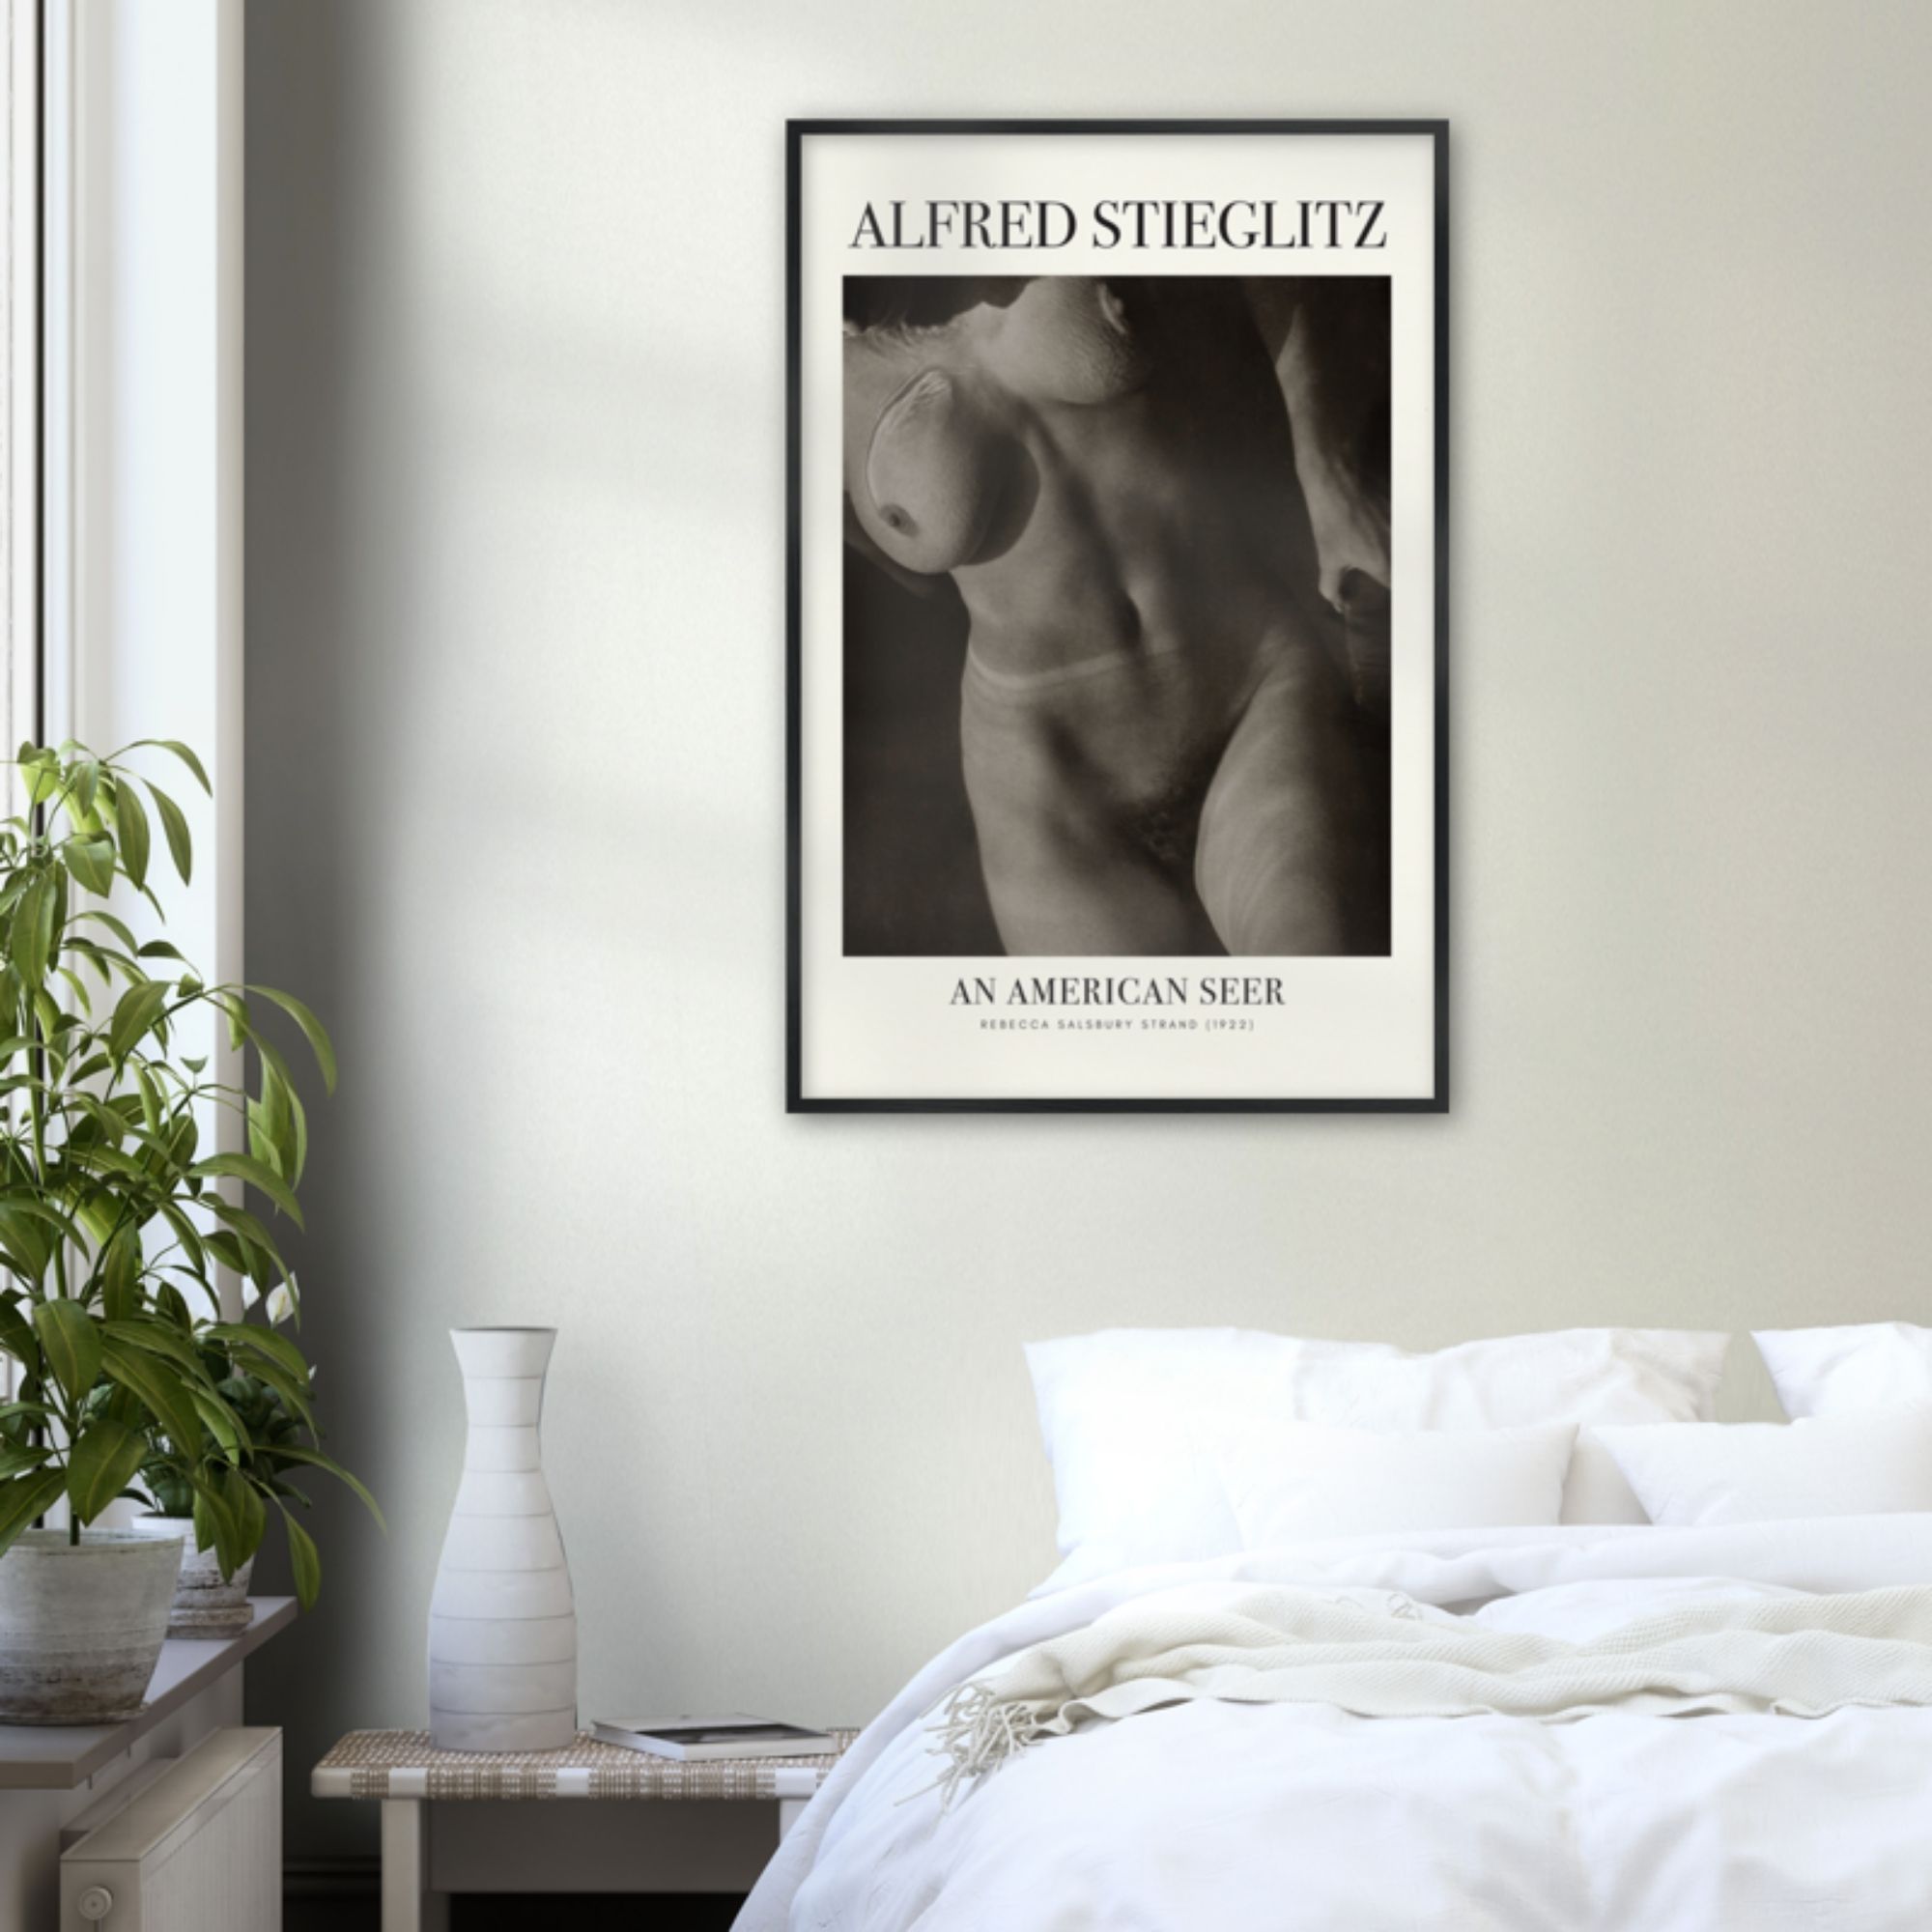 Alfred Stieglitz's photographic mastery, early 20th-century art icon, featuring Gallery 291 exhibitions legacy. Own a piece of art history with our archival museum-quality prints of Stieglitz's work, perfect for sophisticated spaces.